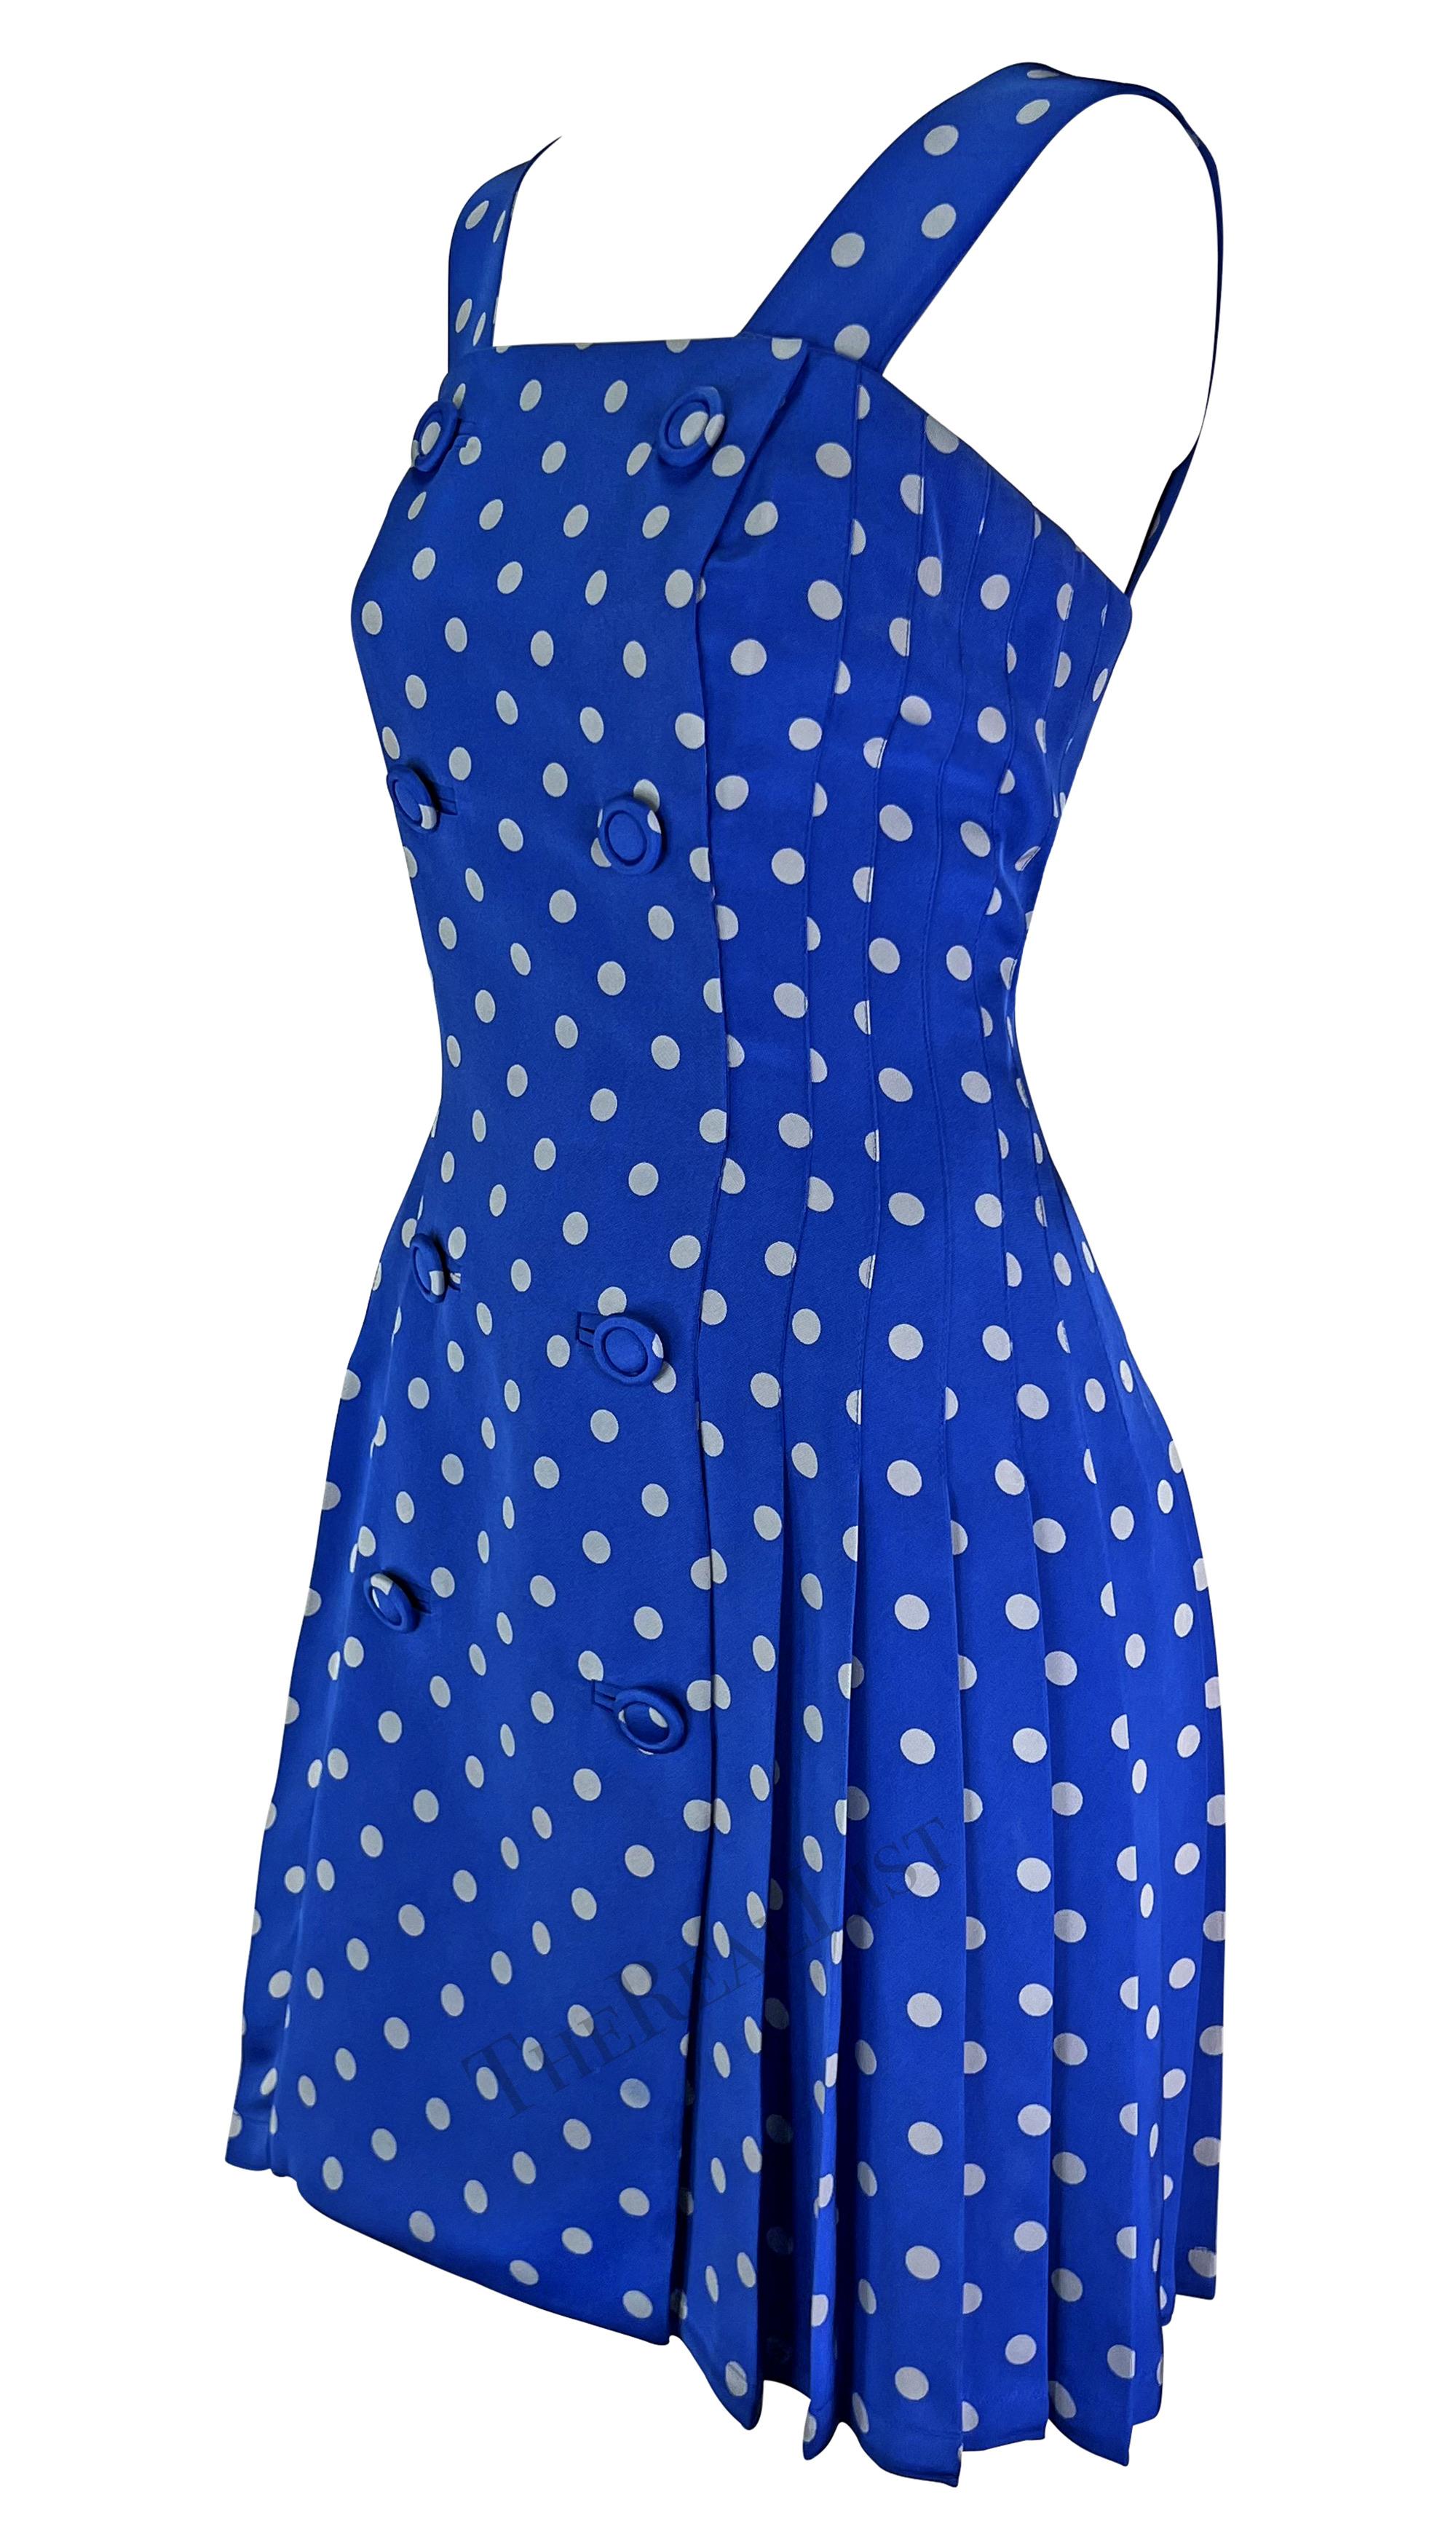 S/S 1994 Gianni Versace Runway Blue Polka Dot Pleated Double Breasted Dress In Excellent Condition For Sale In West Hollywood, CA